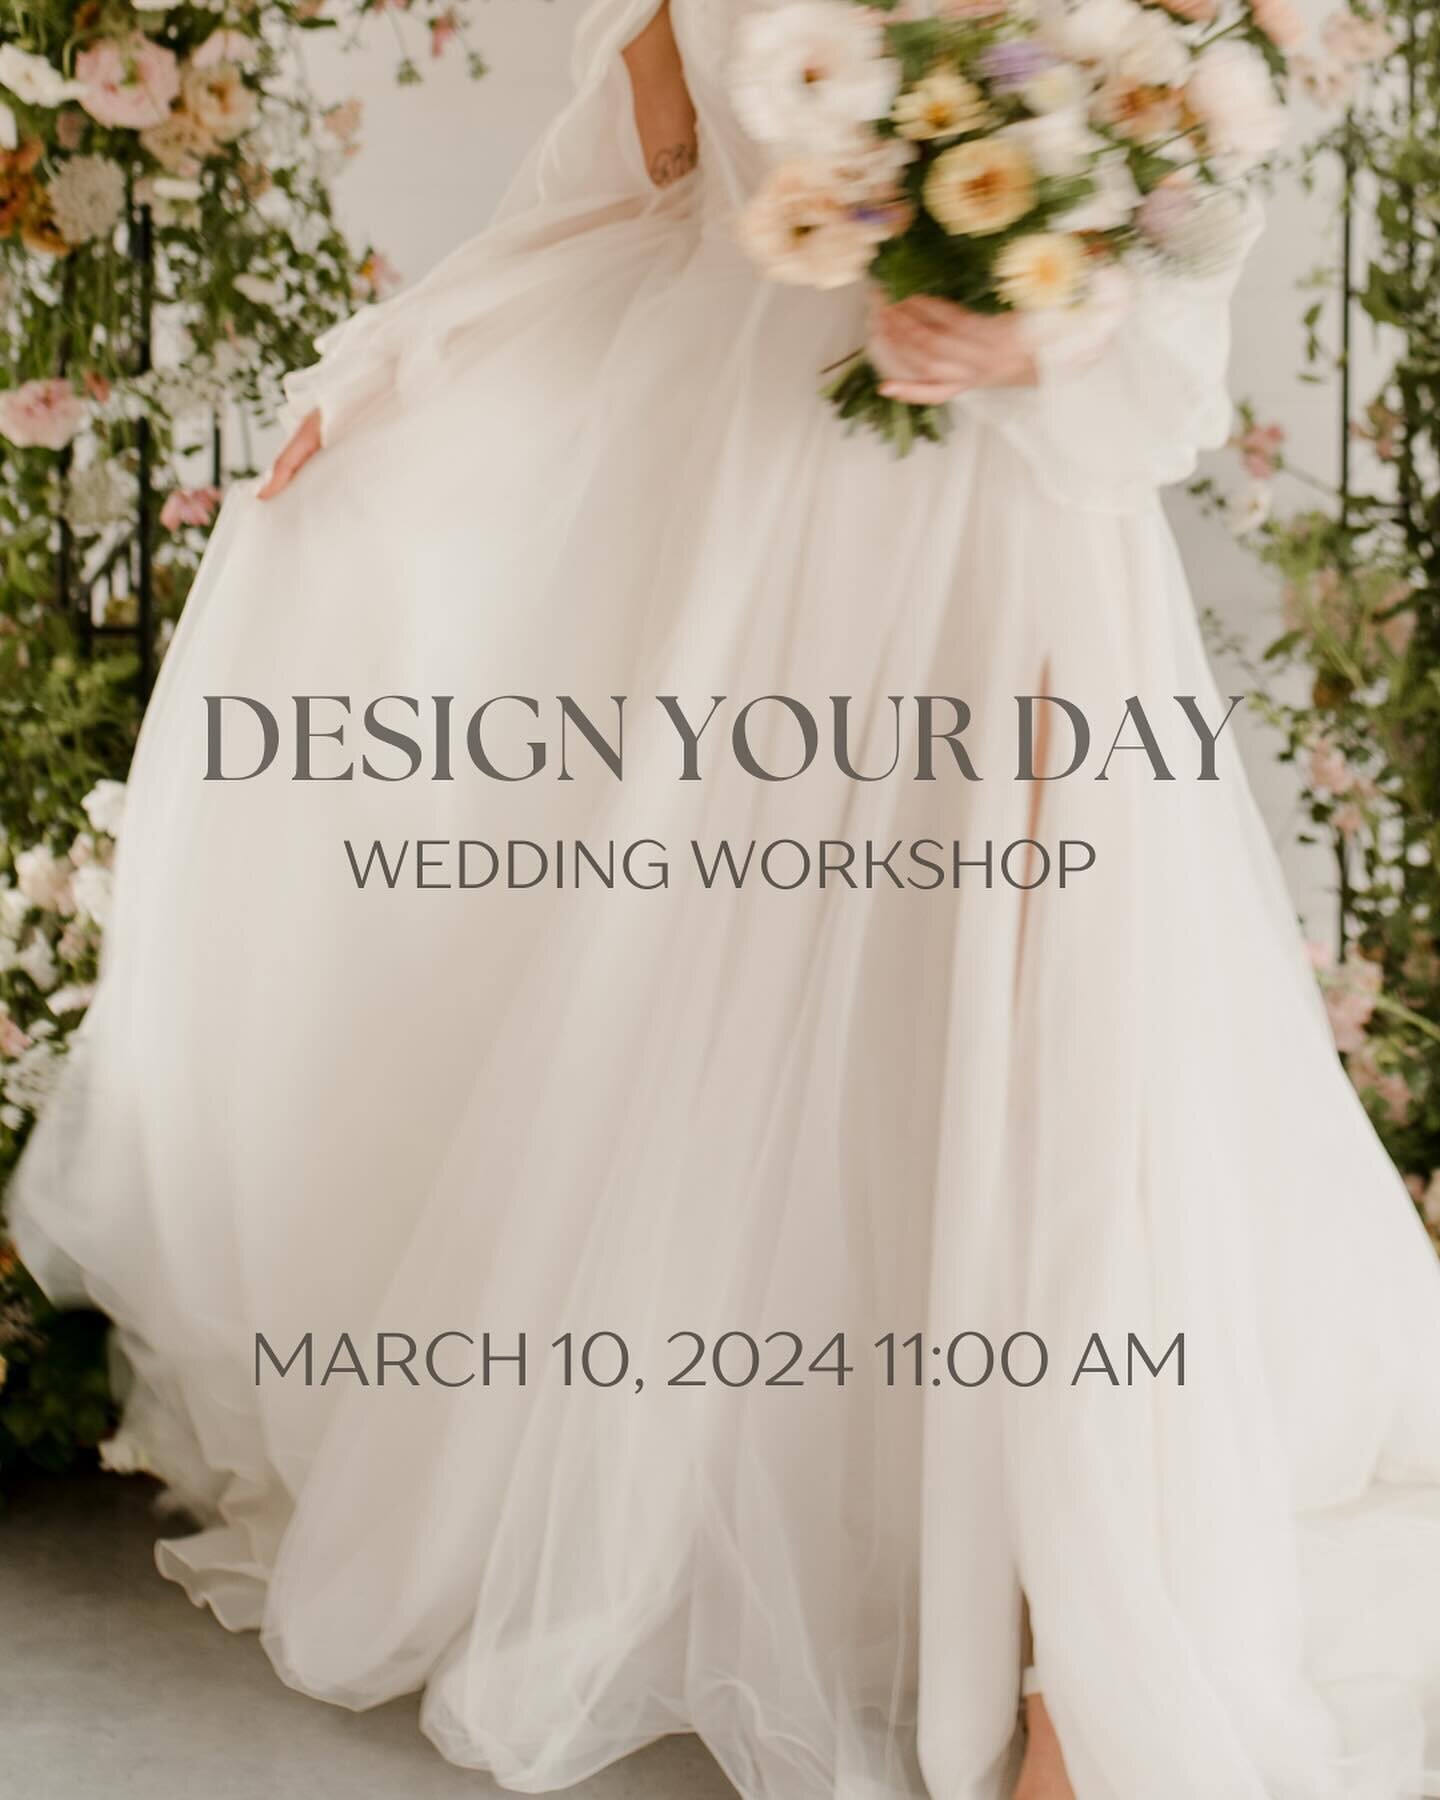 Join us for the ultimate wedding workshop - &ldquo;Design Your Wedding&rdquo; with the incredible Kayla Logos Wedding &amp; Events! 💍

Gain expert insights and learn invaluable tips from Kayla Logos, a renowned wedding planner and designer. Get read